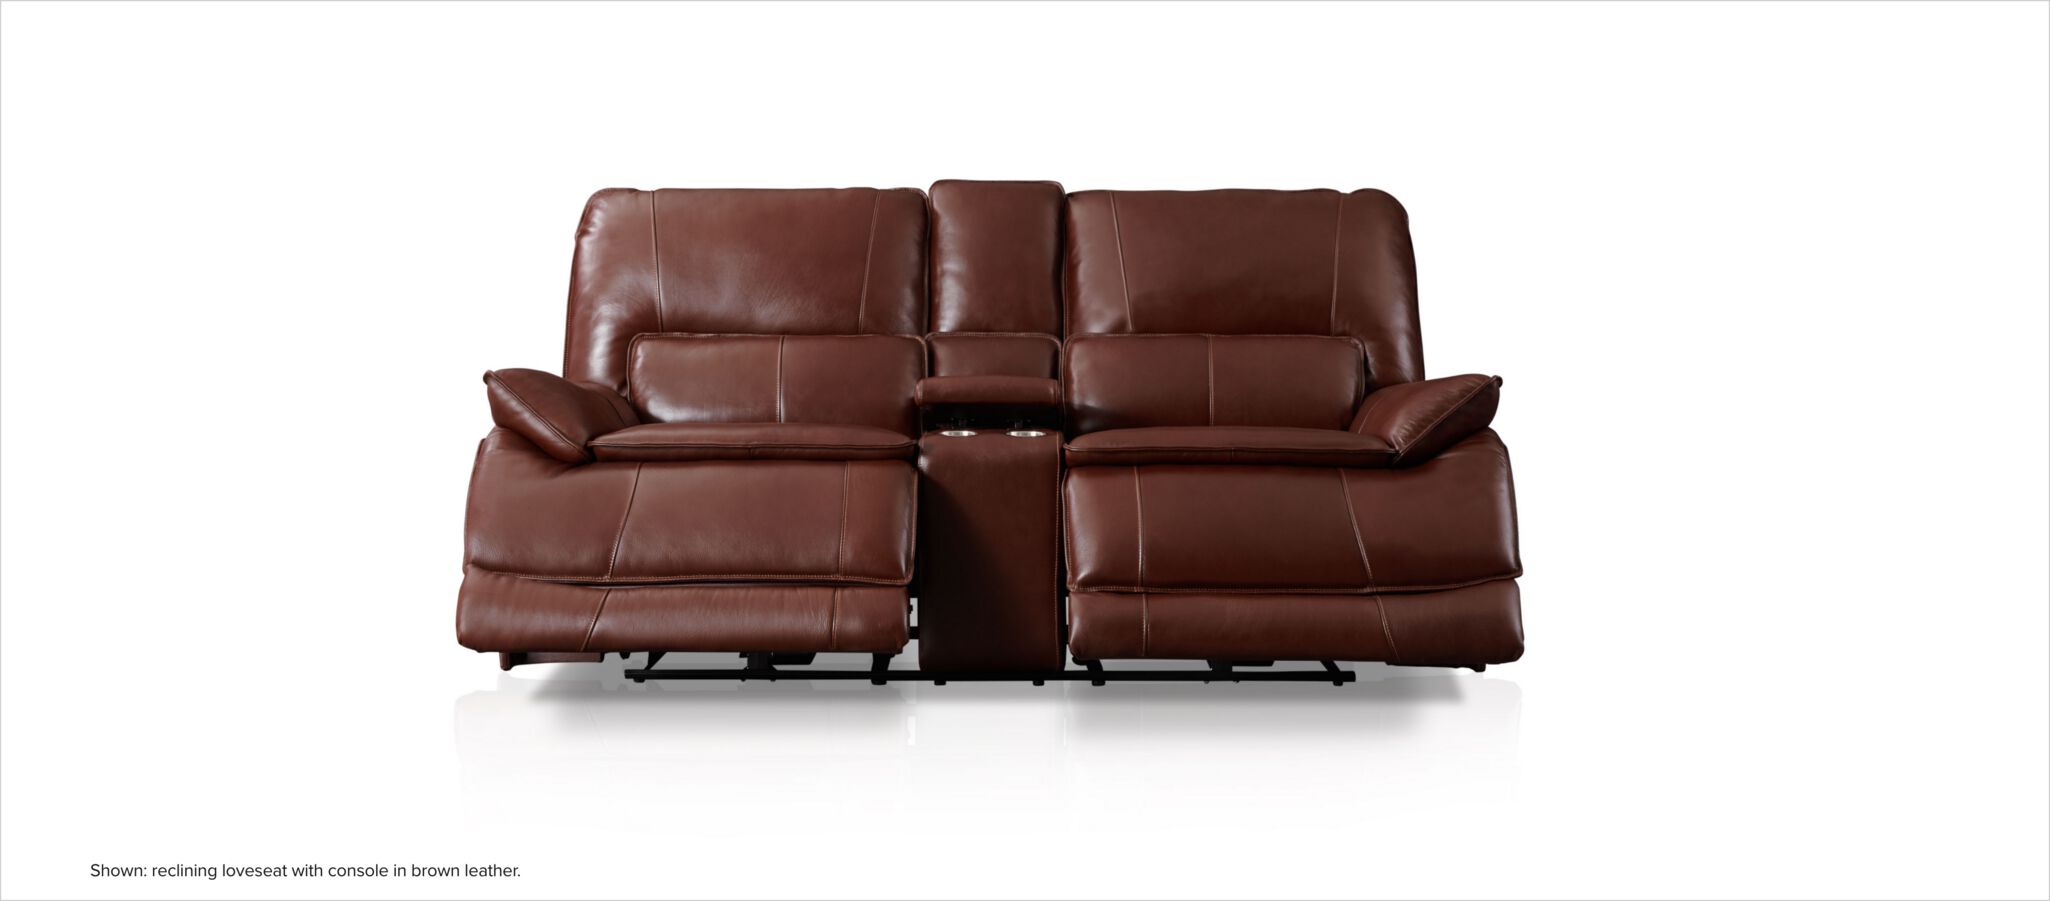 Aston reclining loveseat with console in brown leather.